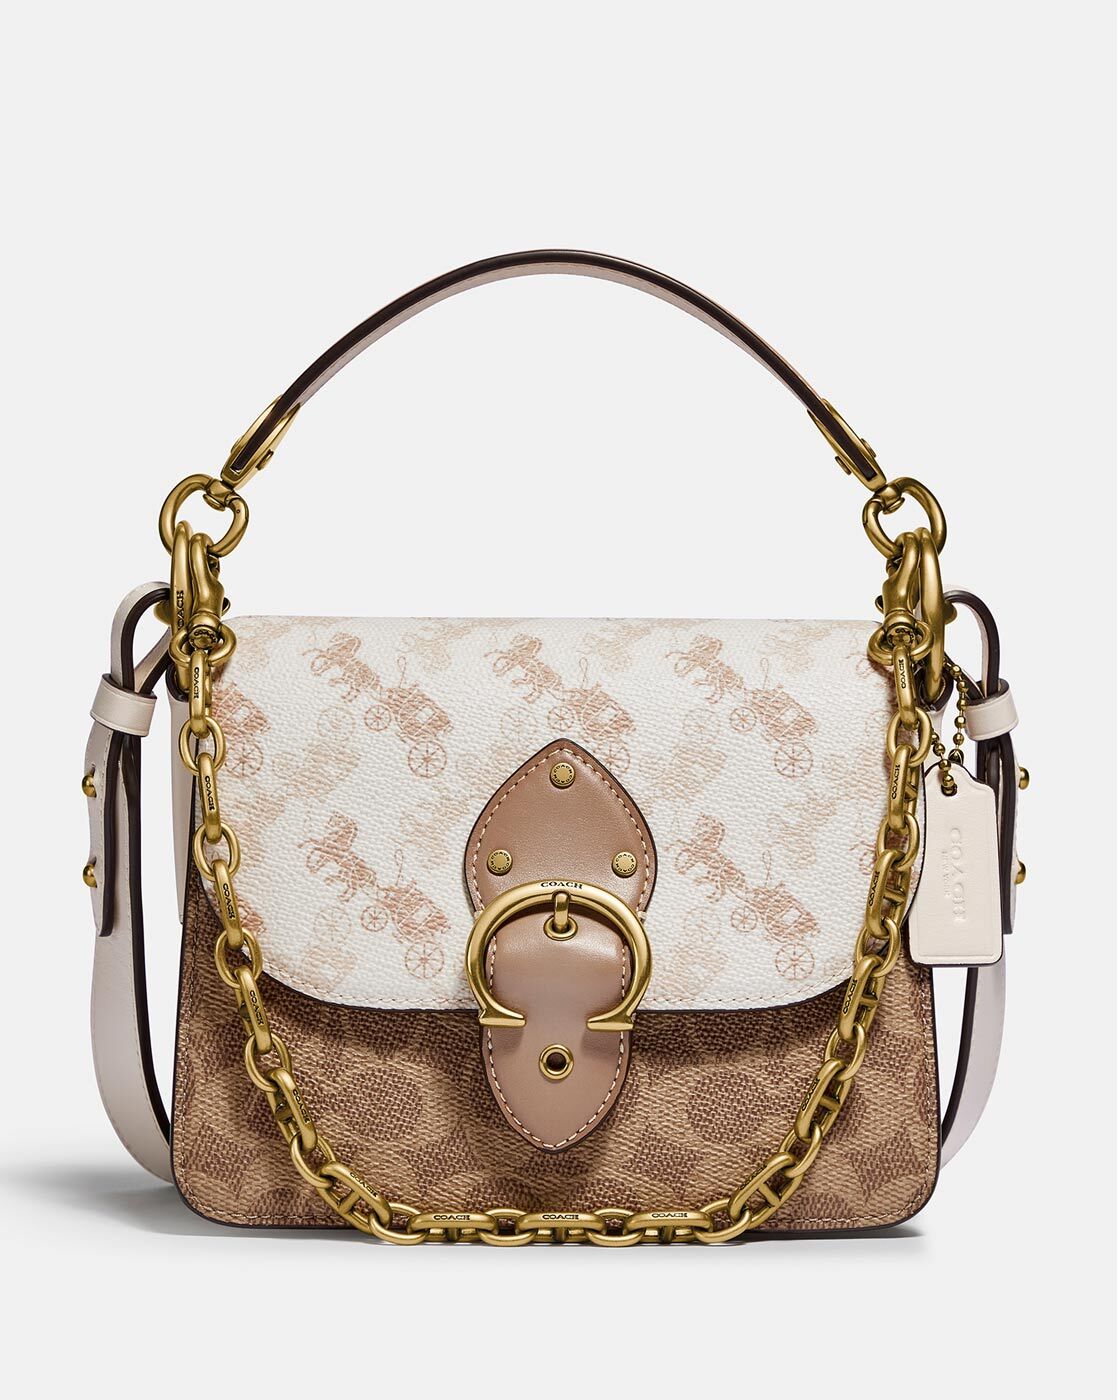 Coach Beat Saddle Bag With Horse And Carriage Print ~ What fits in this  Bag? 